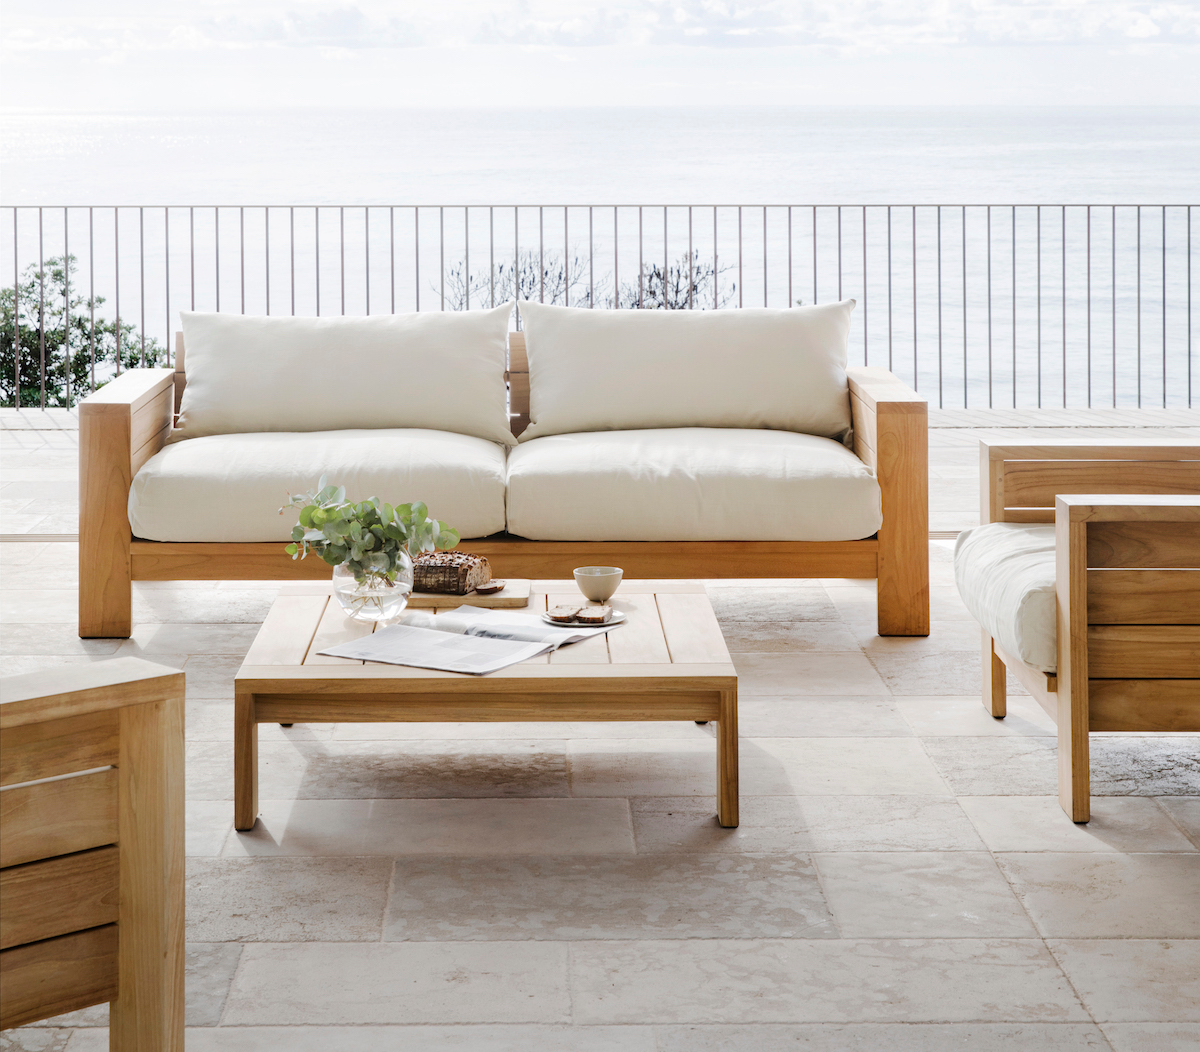 The Nomah Outdoor Lounge Collection is ideal snuggling up outdoors 